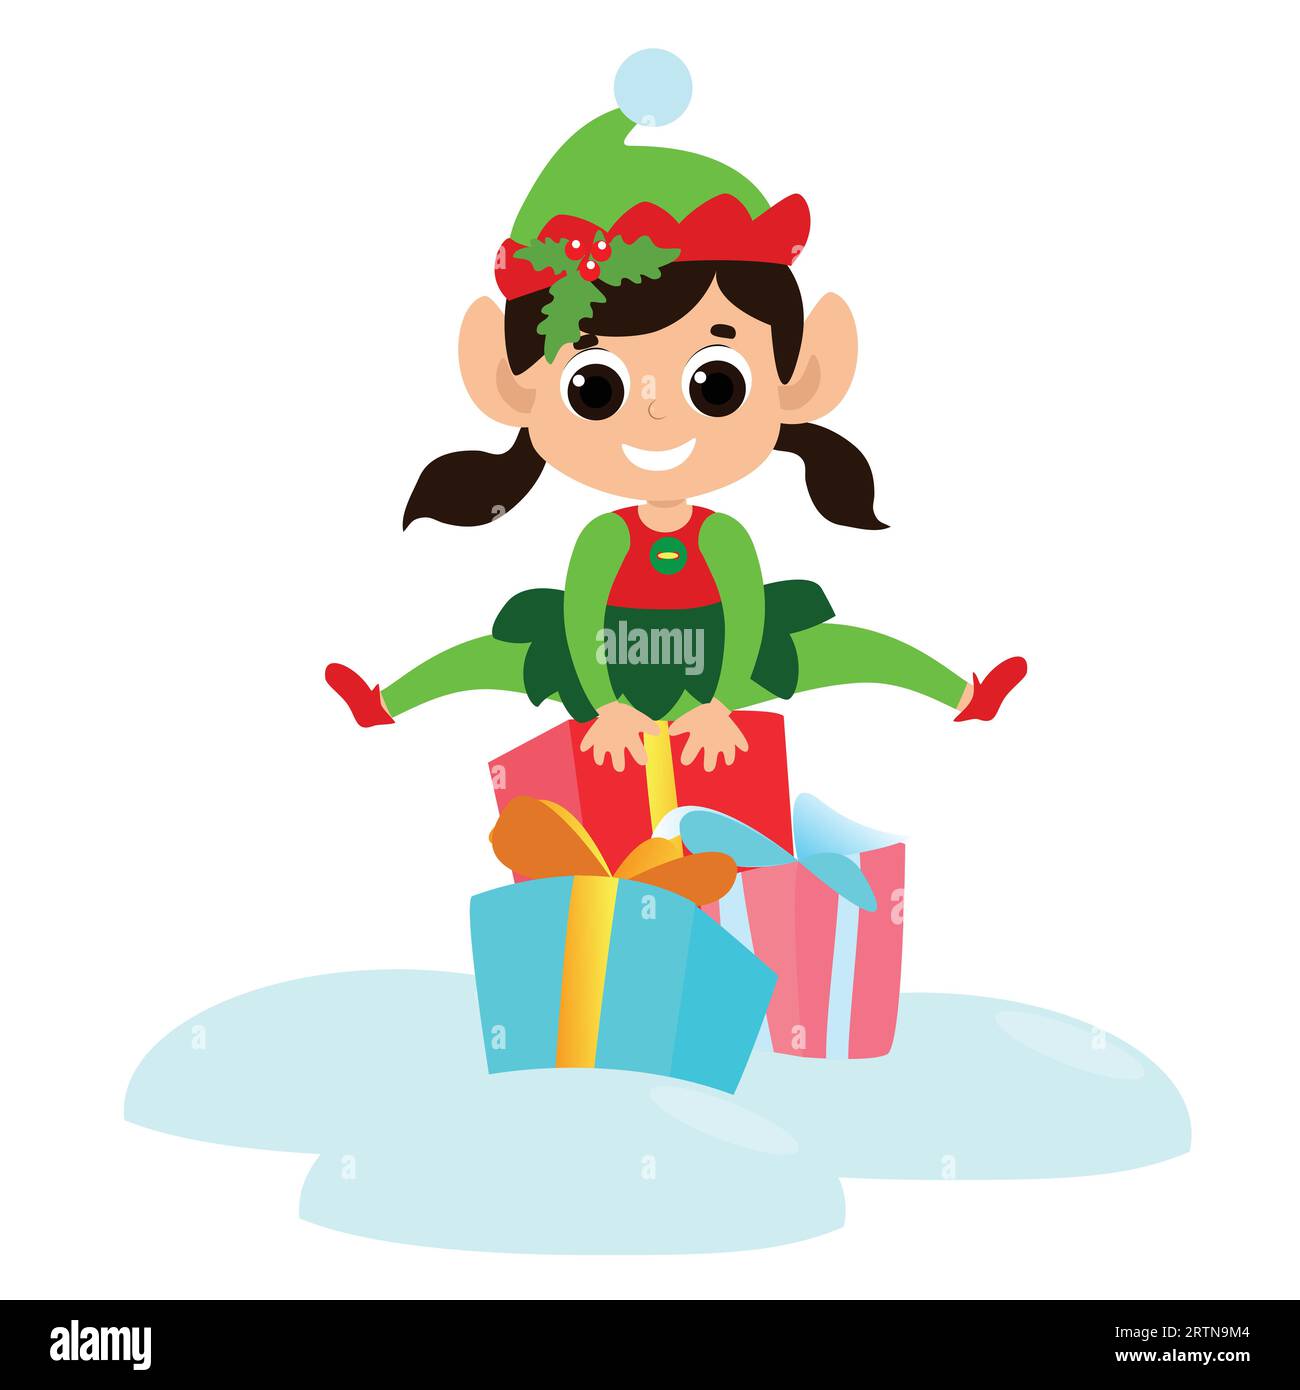 Little elf girl jumps over gift boxes. The child is happy and dressed in a traditional elf costume. She has a cute face and happy eyes. Stock Vector